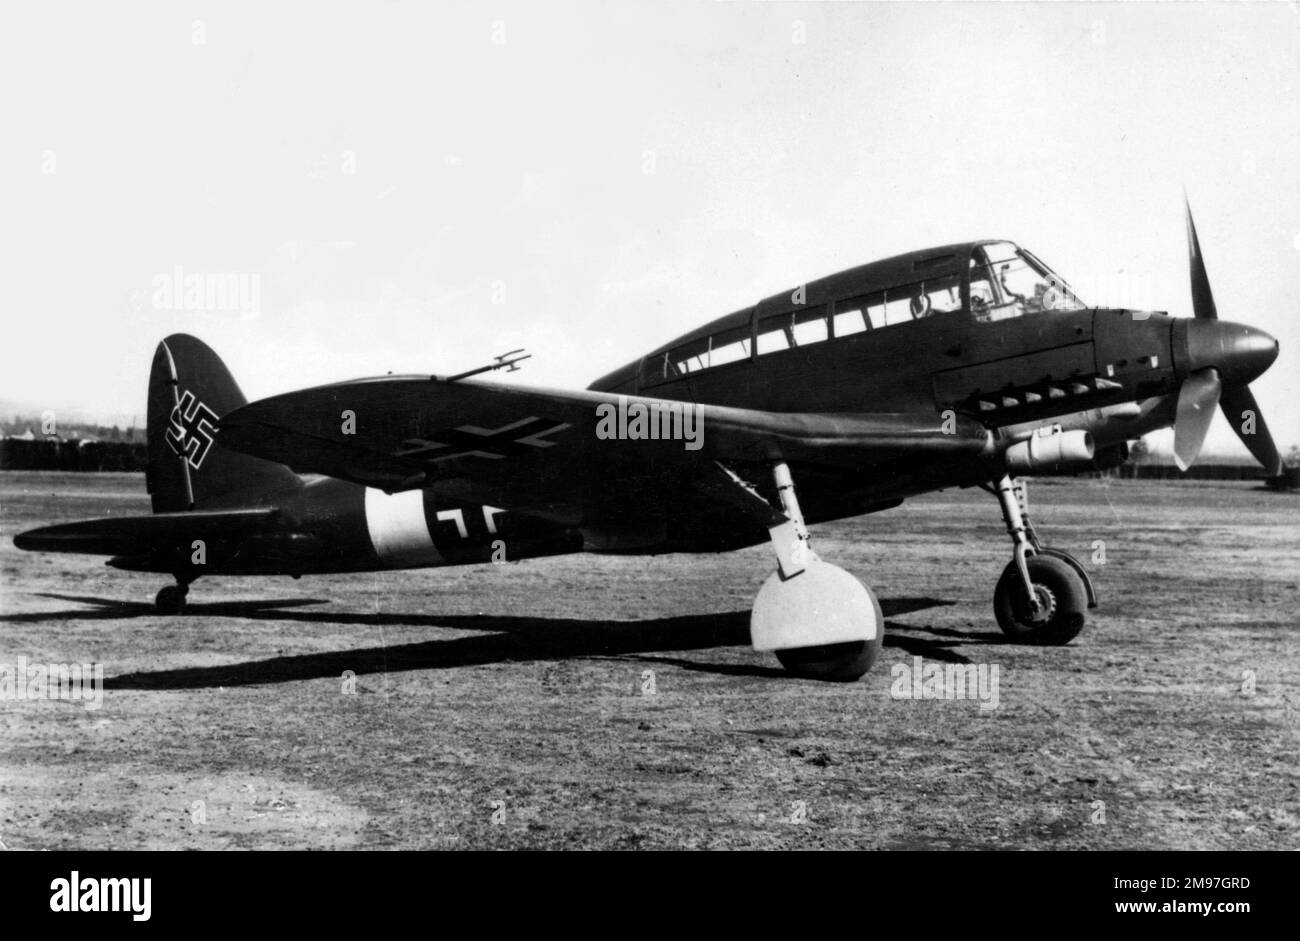 SIAI Marchetti SM93 -this Italian attempt at a Ju 87 'Stuka' replacement used a prone pilot position and was tested by the Luftwaffe. Stock Photo